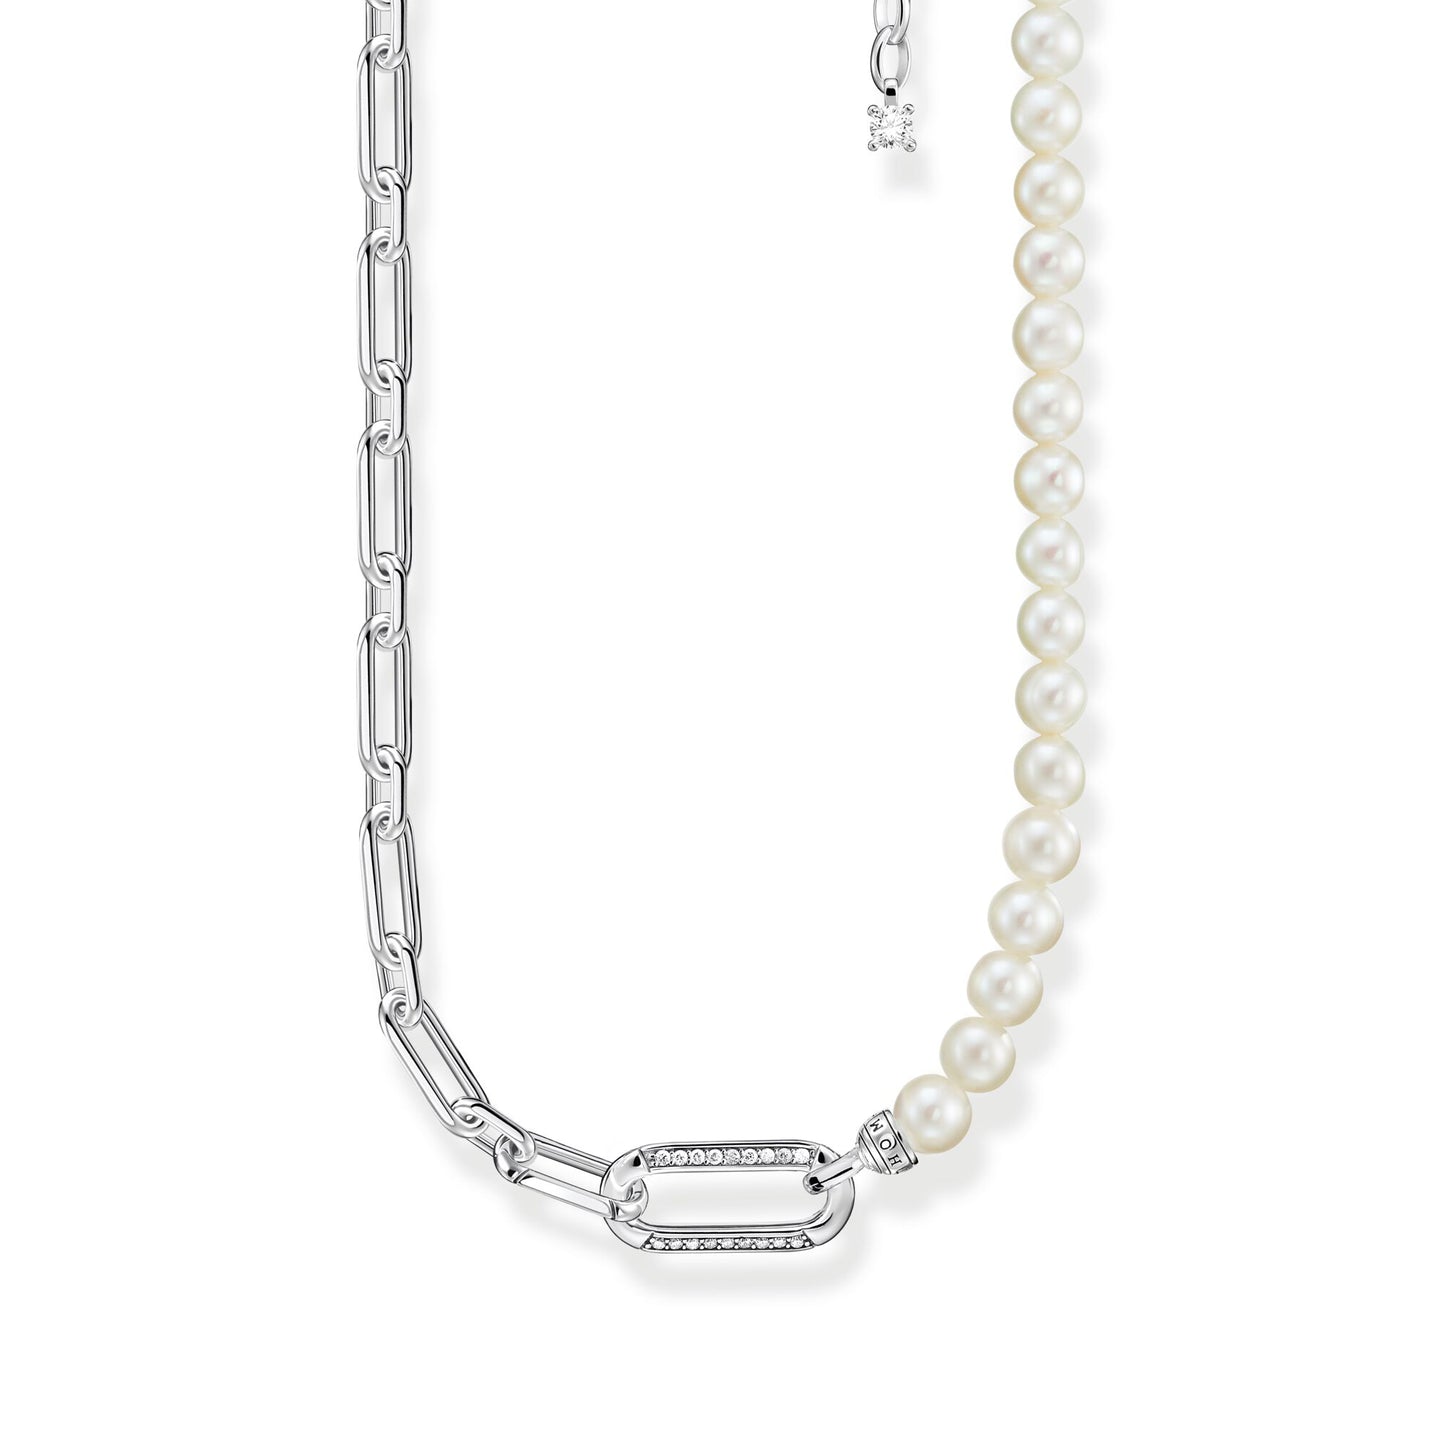 STERLING SILVER HERITAGE CHAIN LINKS & FRESHWATER PEARL NECKLACE 45CM